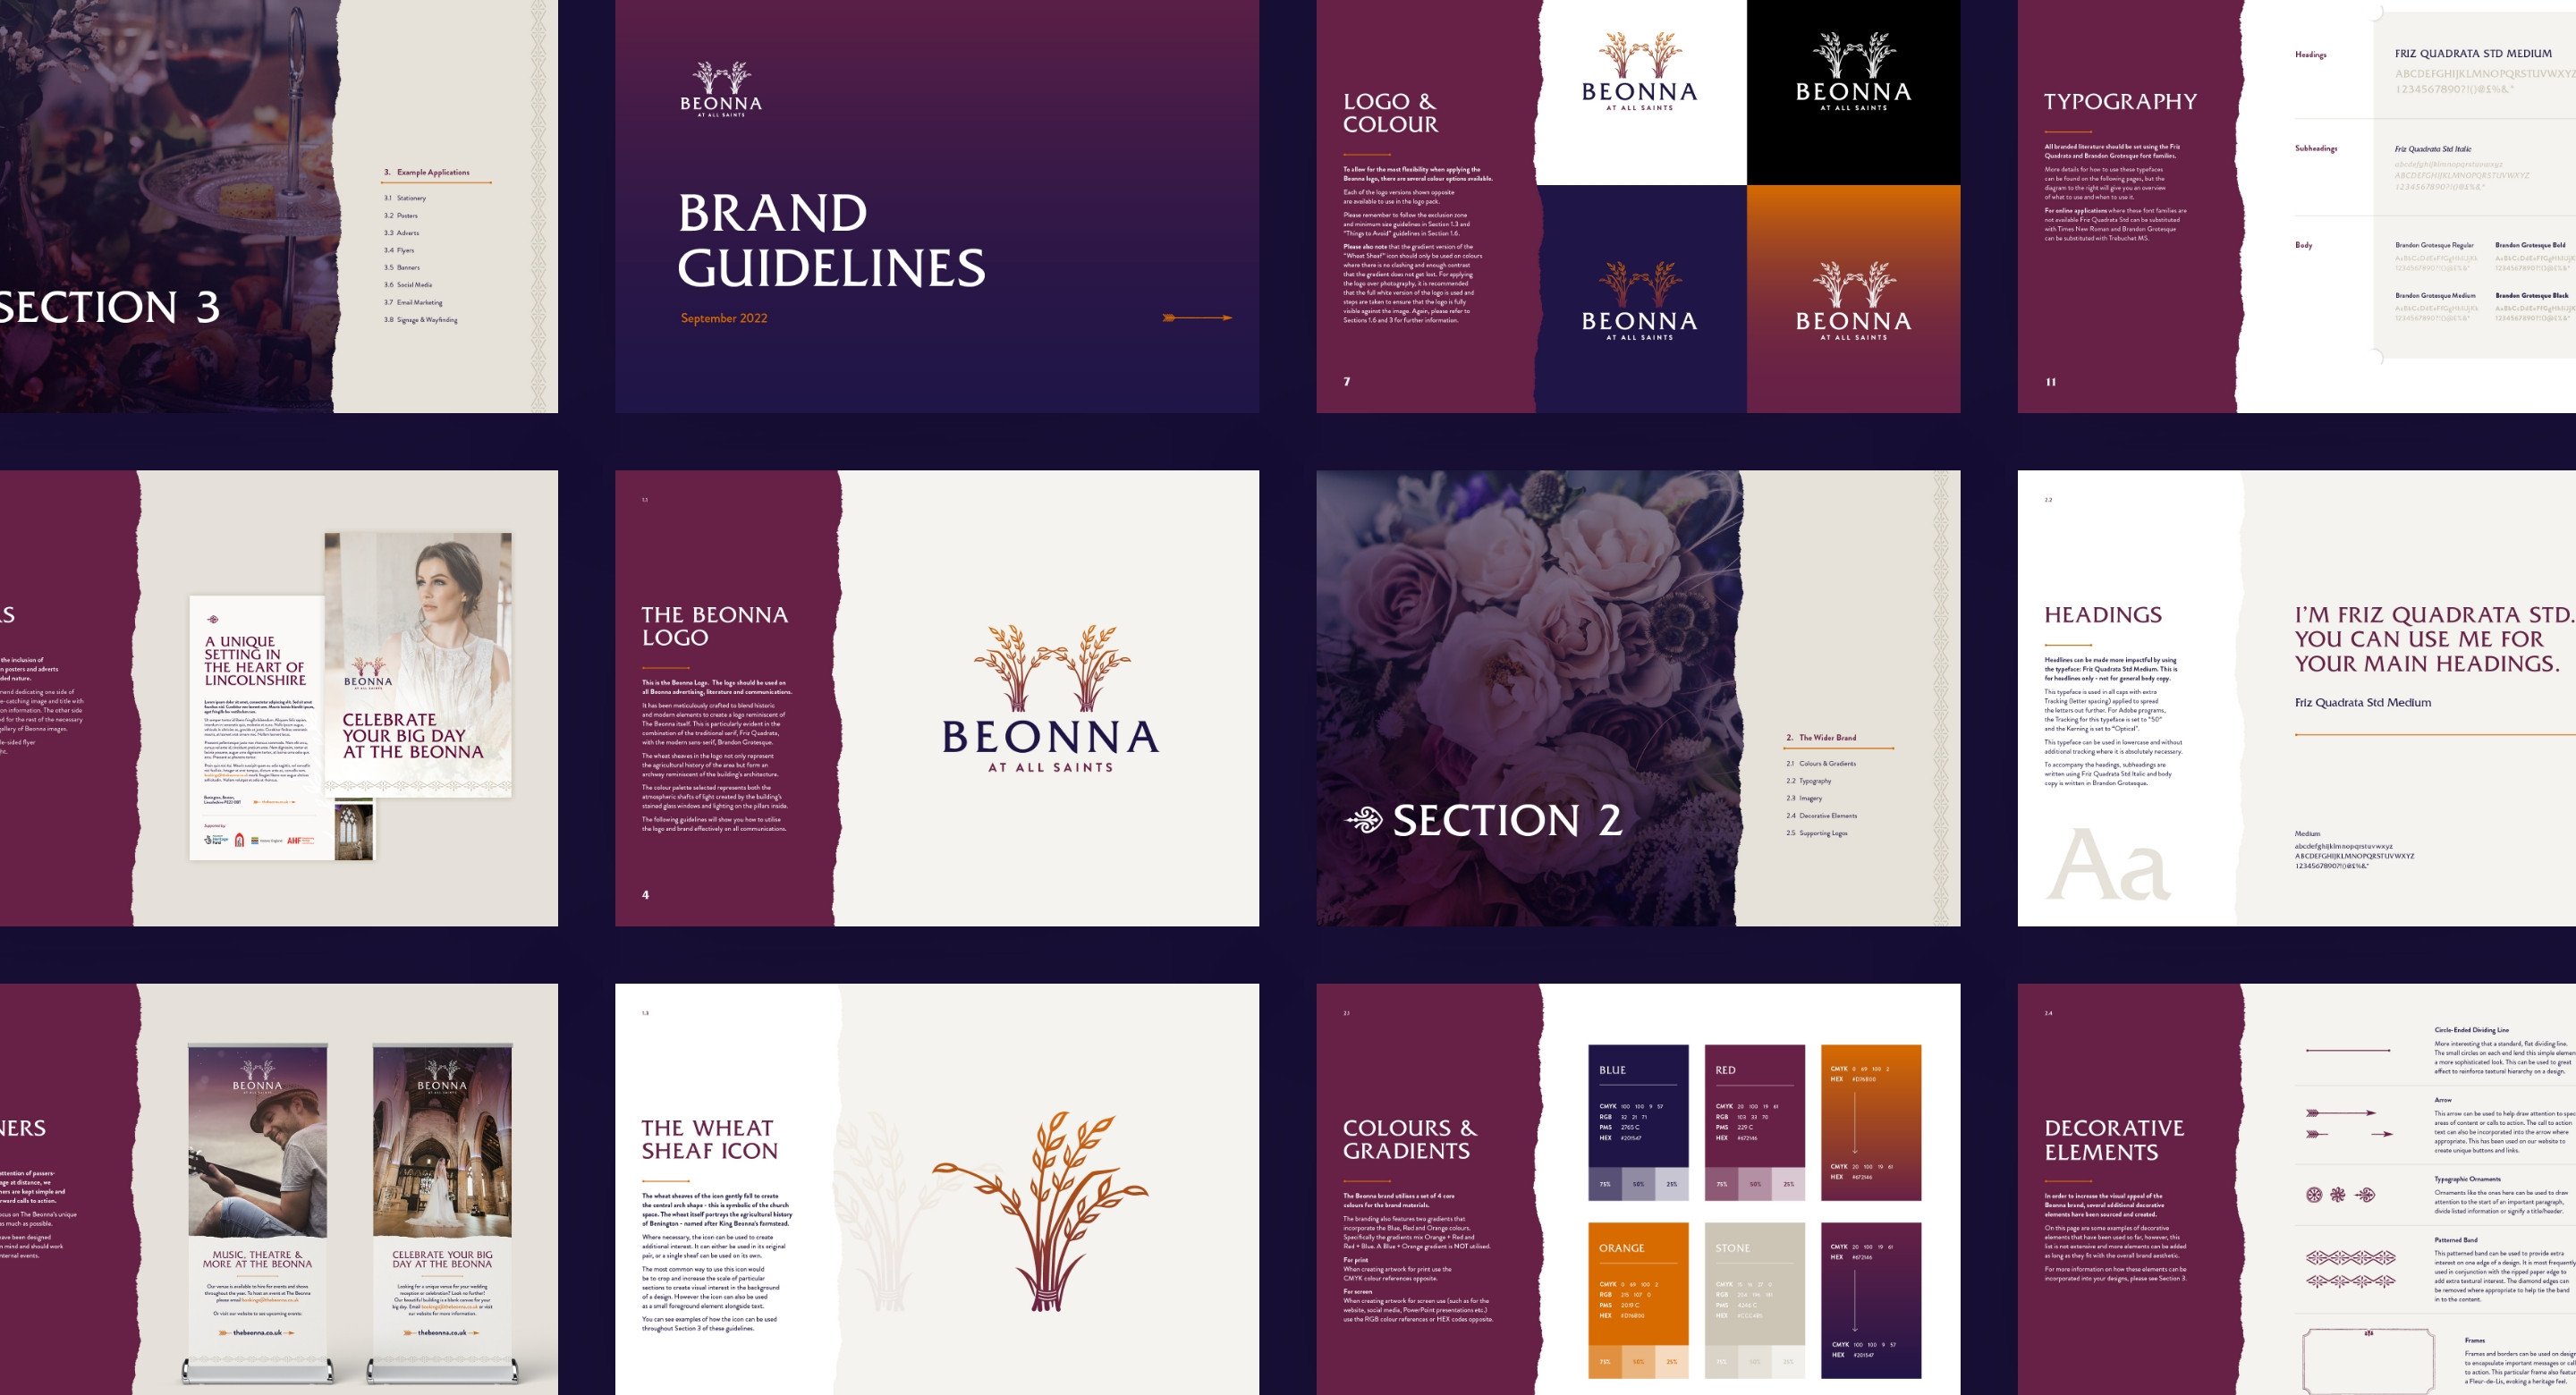 Heritage site logo and brand guidelines design by Root Studio